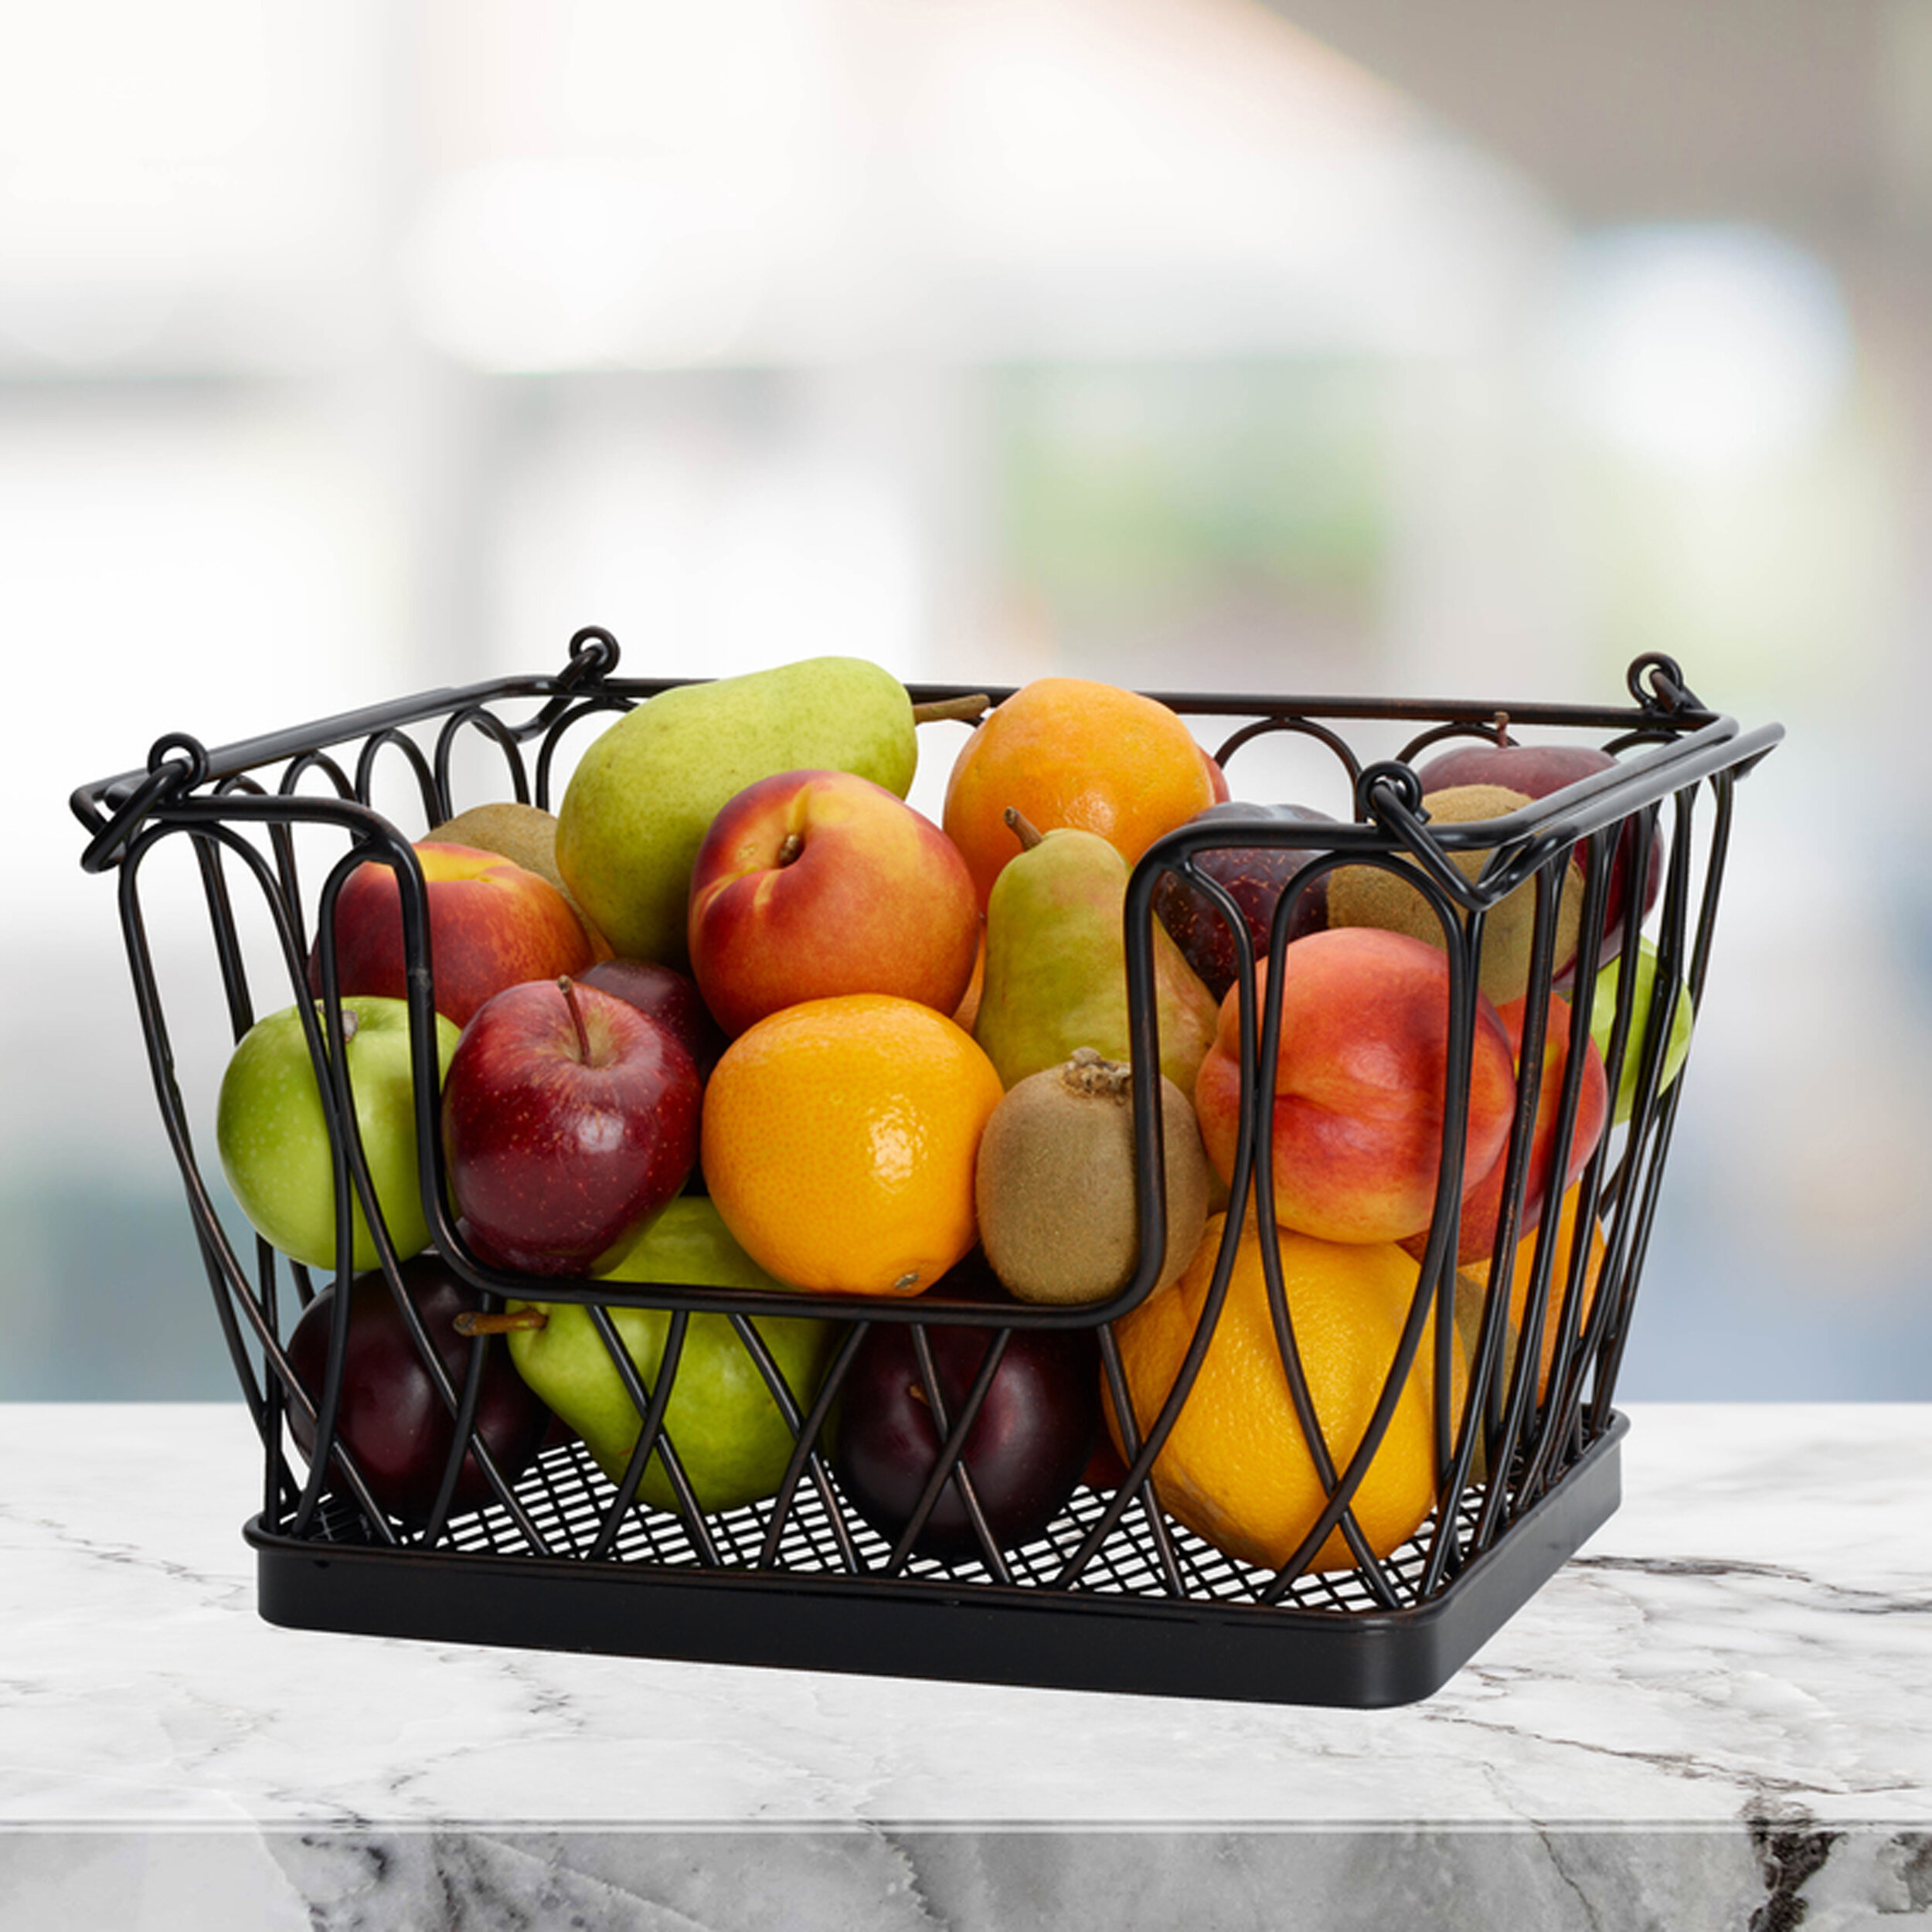 Candy 9.75 x 5.75 x 3.75 Inches Yesland Wire Metal Kitchen Fruit Basket Large Hemisphere Fruit Storage Basket for Bread K Cup and Other Household Items 